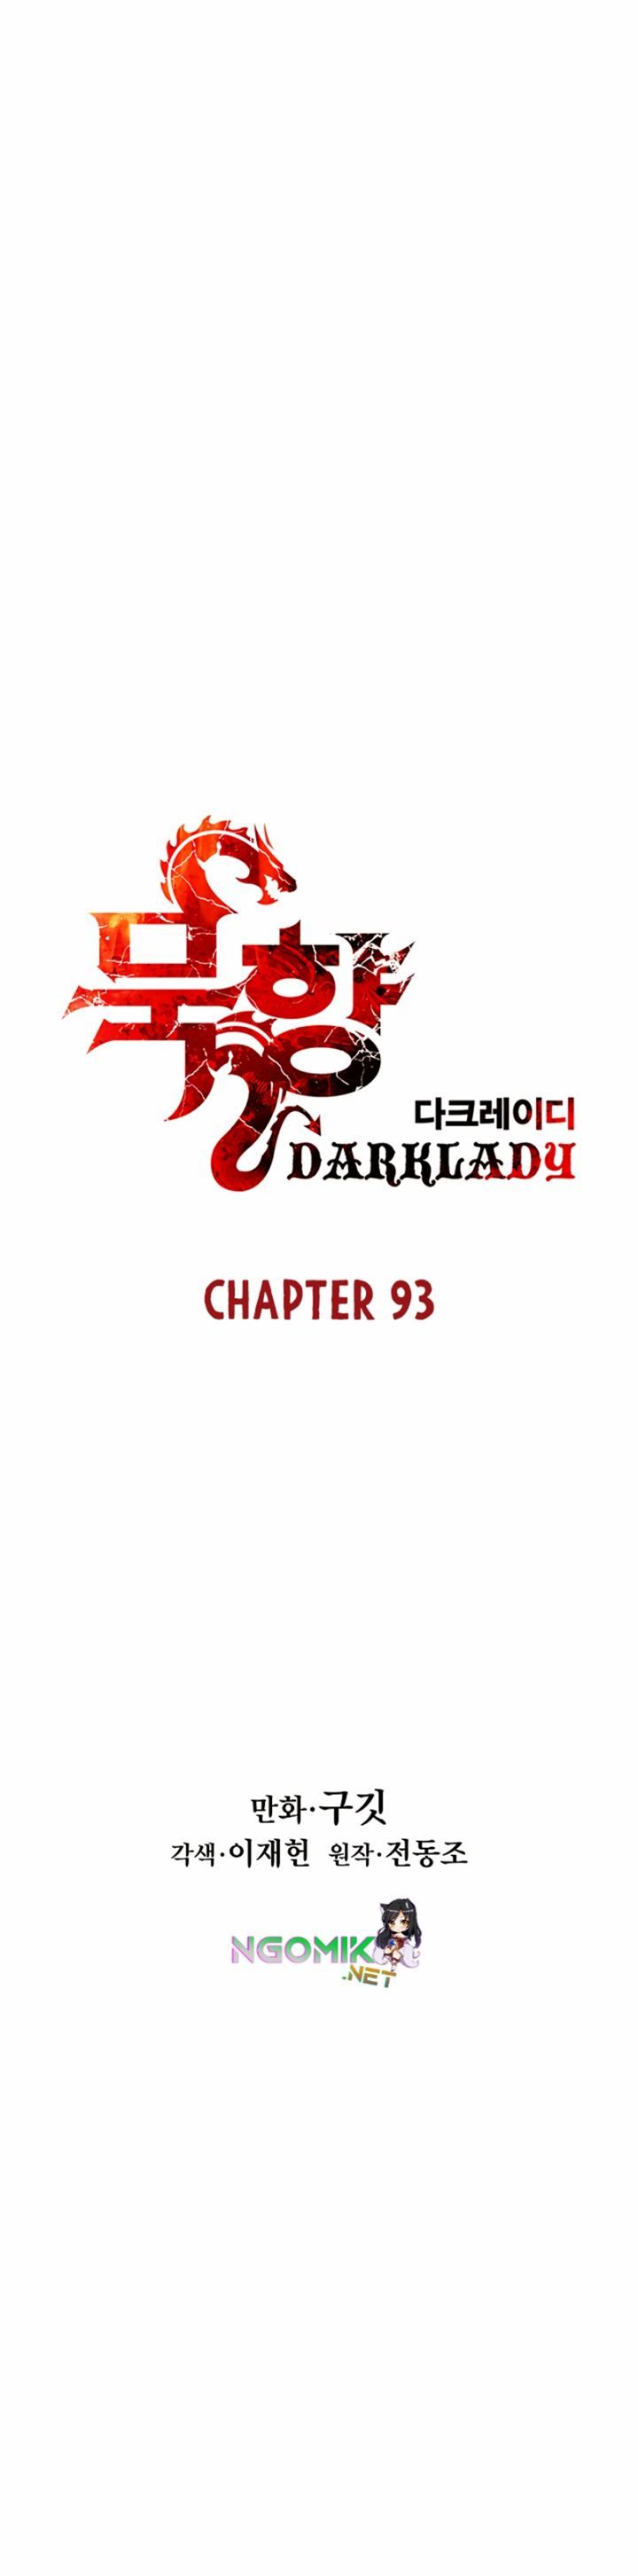 MookHyang – Dark Lady Chapter 93